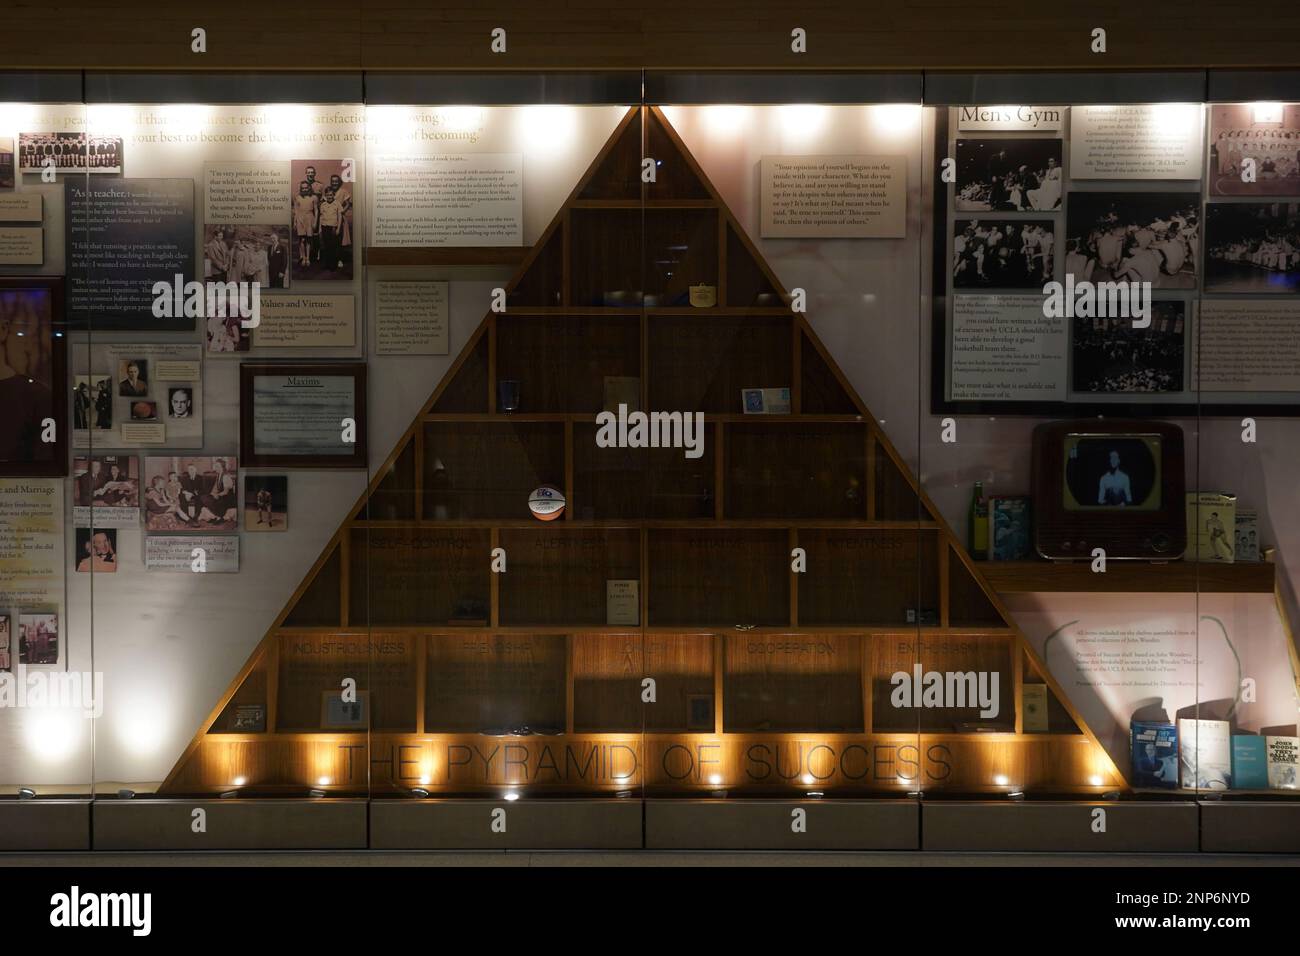 A John Wooden Pyramid of Success exhibit at Pauley Pavilion on the campus  of UCLA, Wednesday, Dec. 9, 2020, in Los Angeles, Calif. The facility.  opened in 1965, is the home of